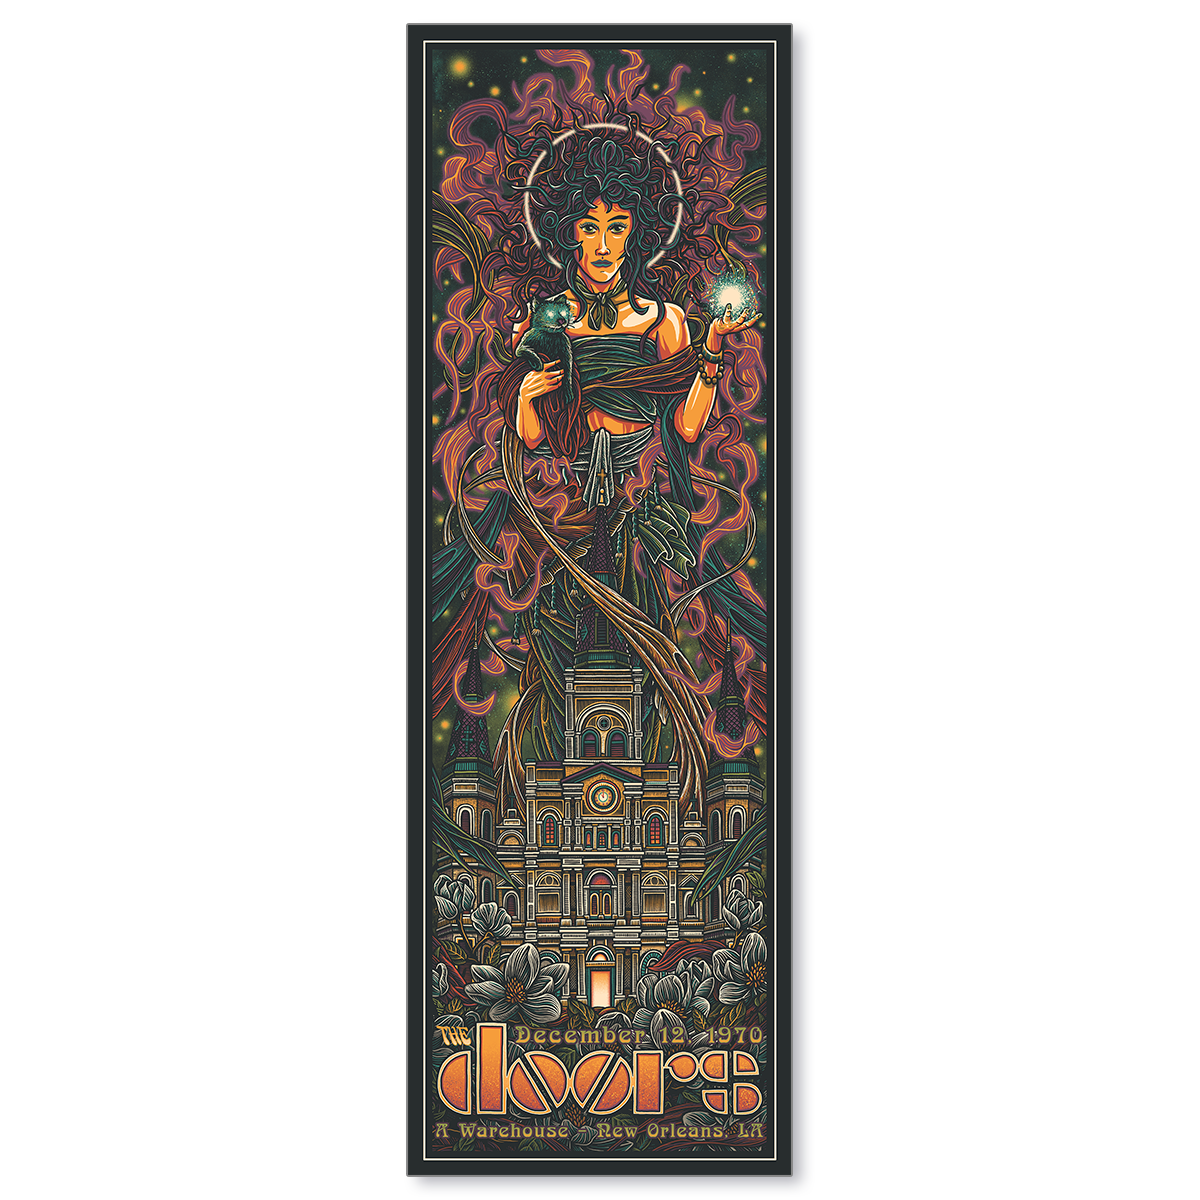 The Doors New Orleans 1970 by Luke Martin (Variant Edition Foil Studio Copy)